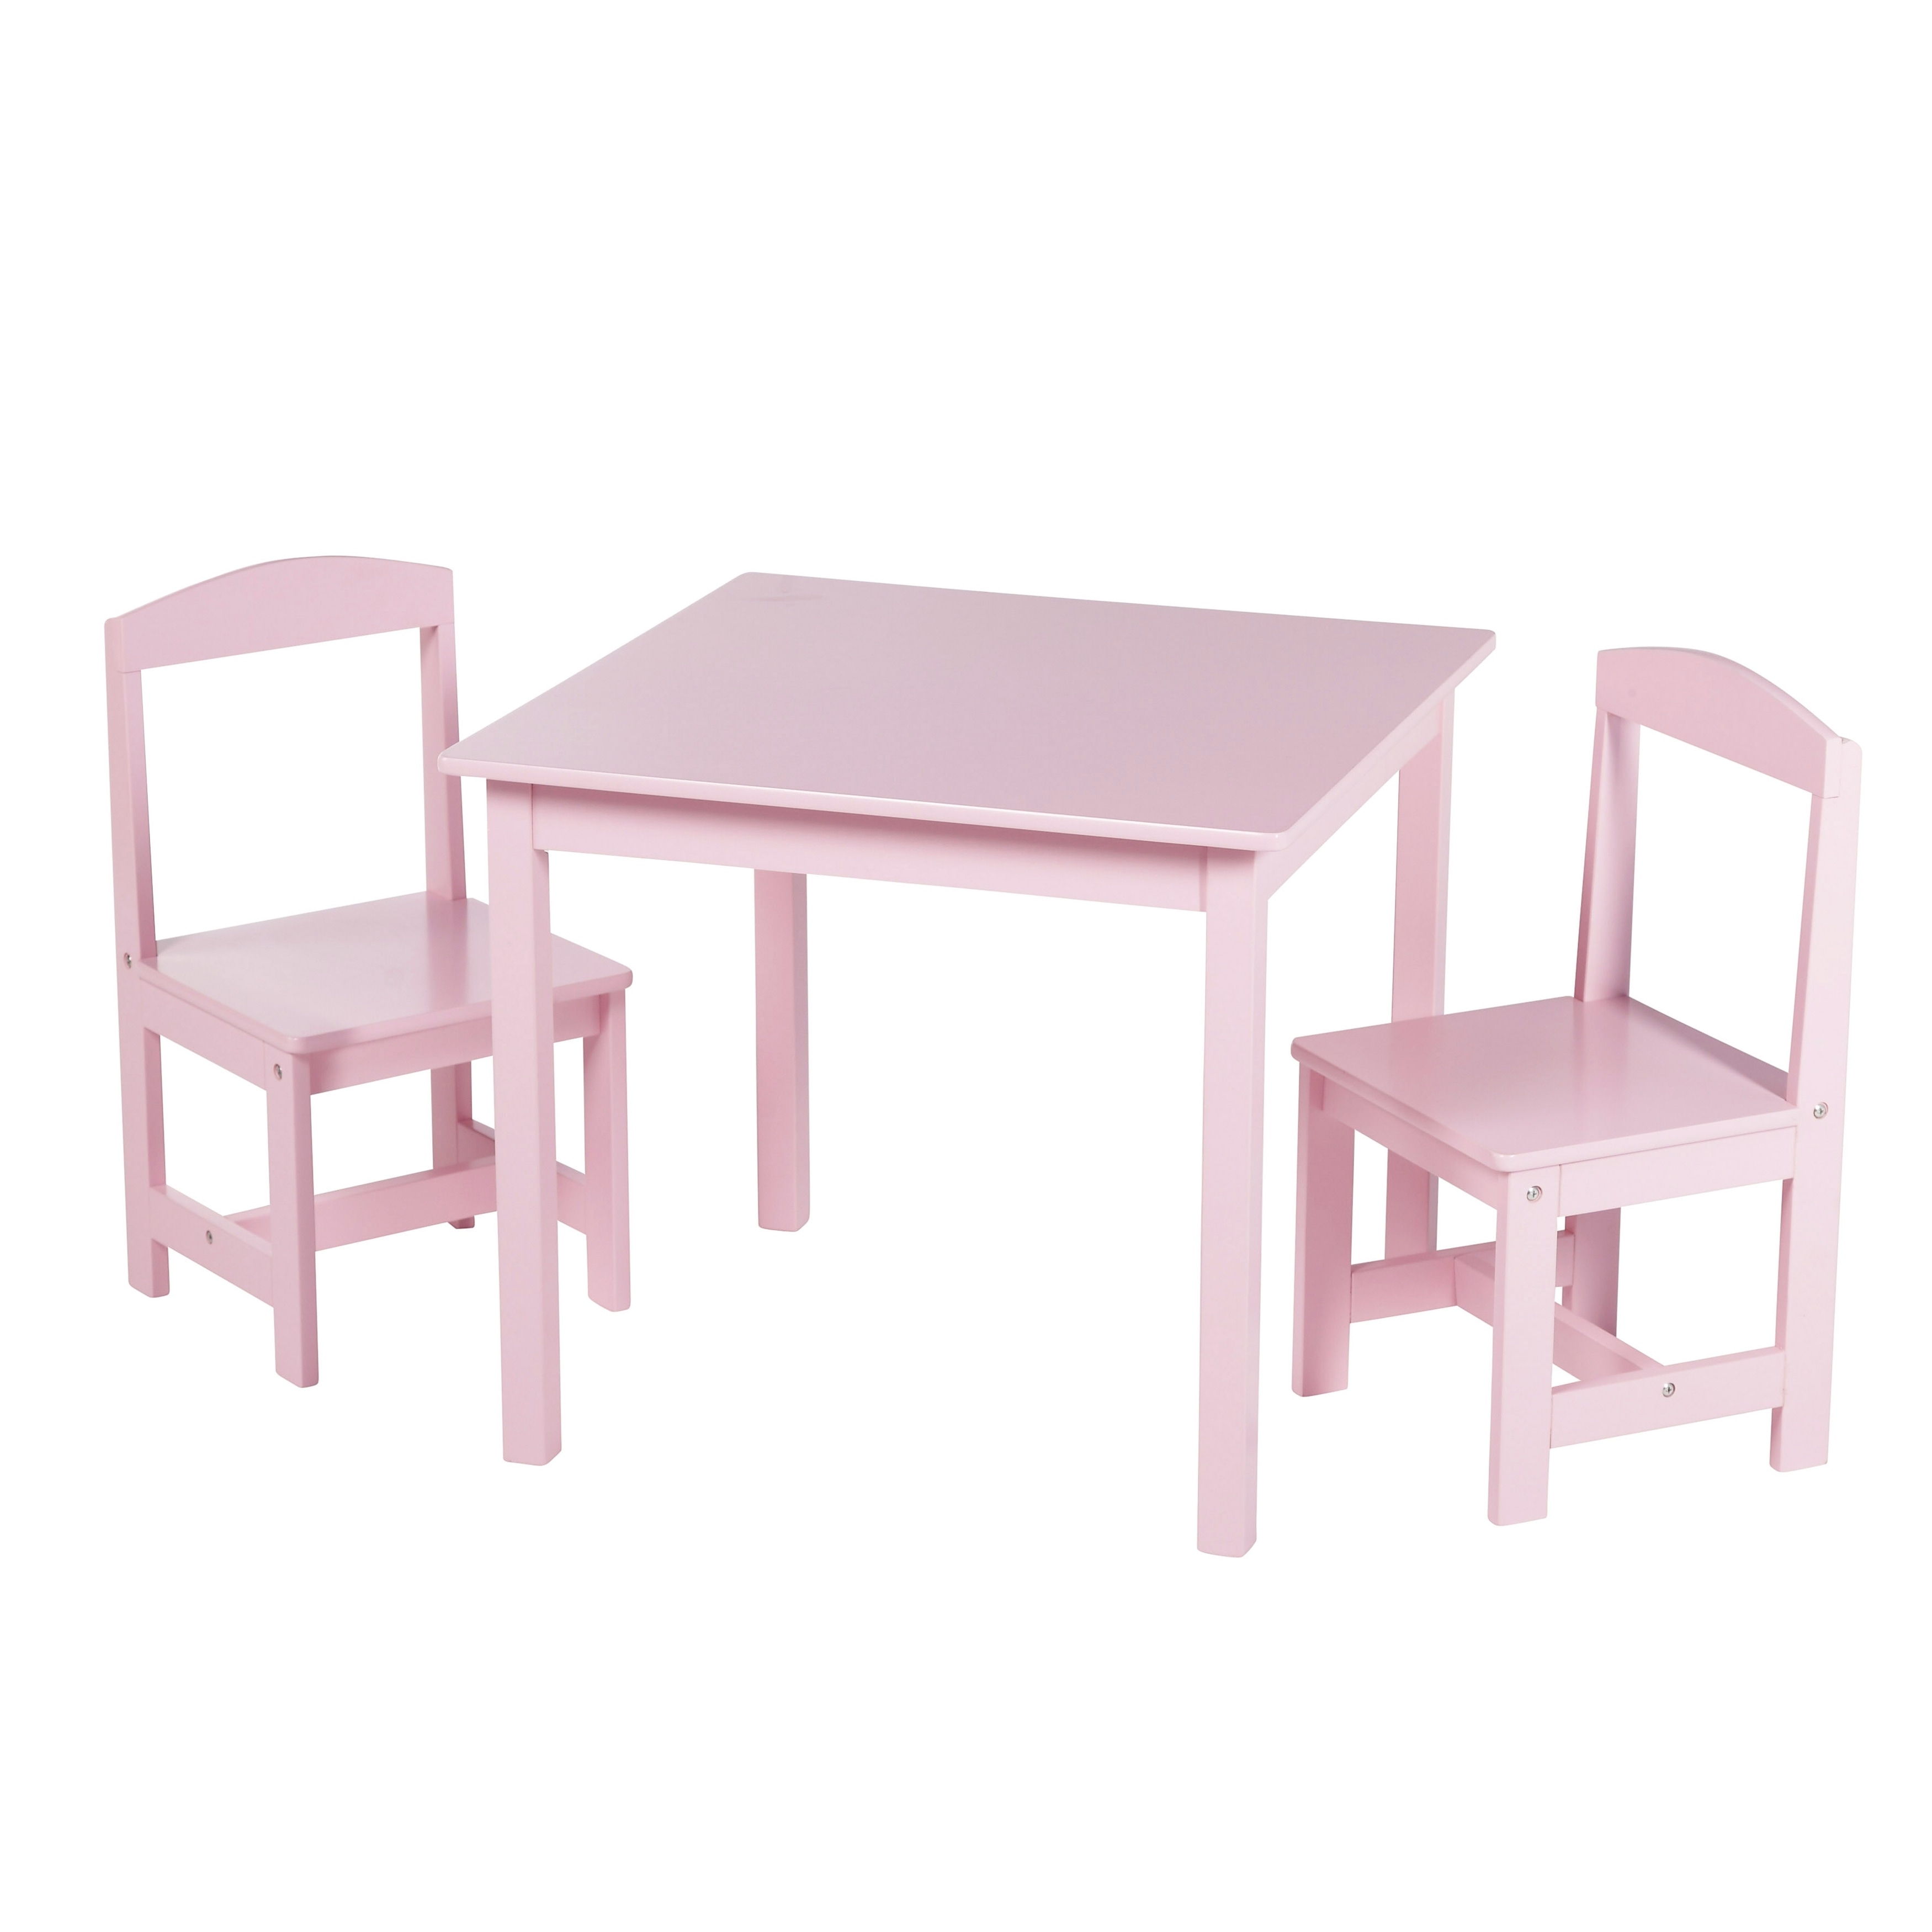 https://ak1.ostkcdn.com/images/products/is/images/direct/f834e4dba1bf8748c7e5fee9cc17911e43784f7a/Simple-Living-White-3-piece-Hayden-Kids-Table-Chair-Set.jpg